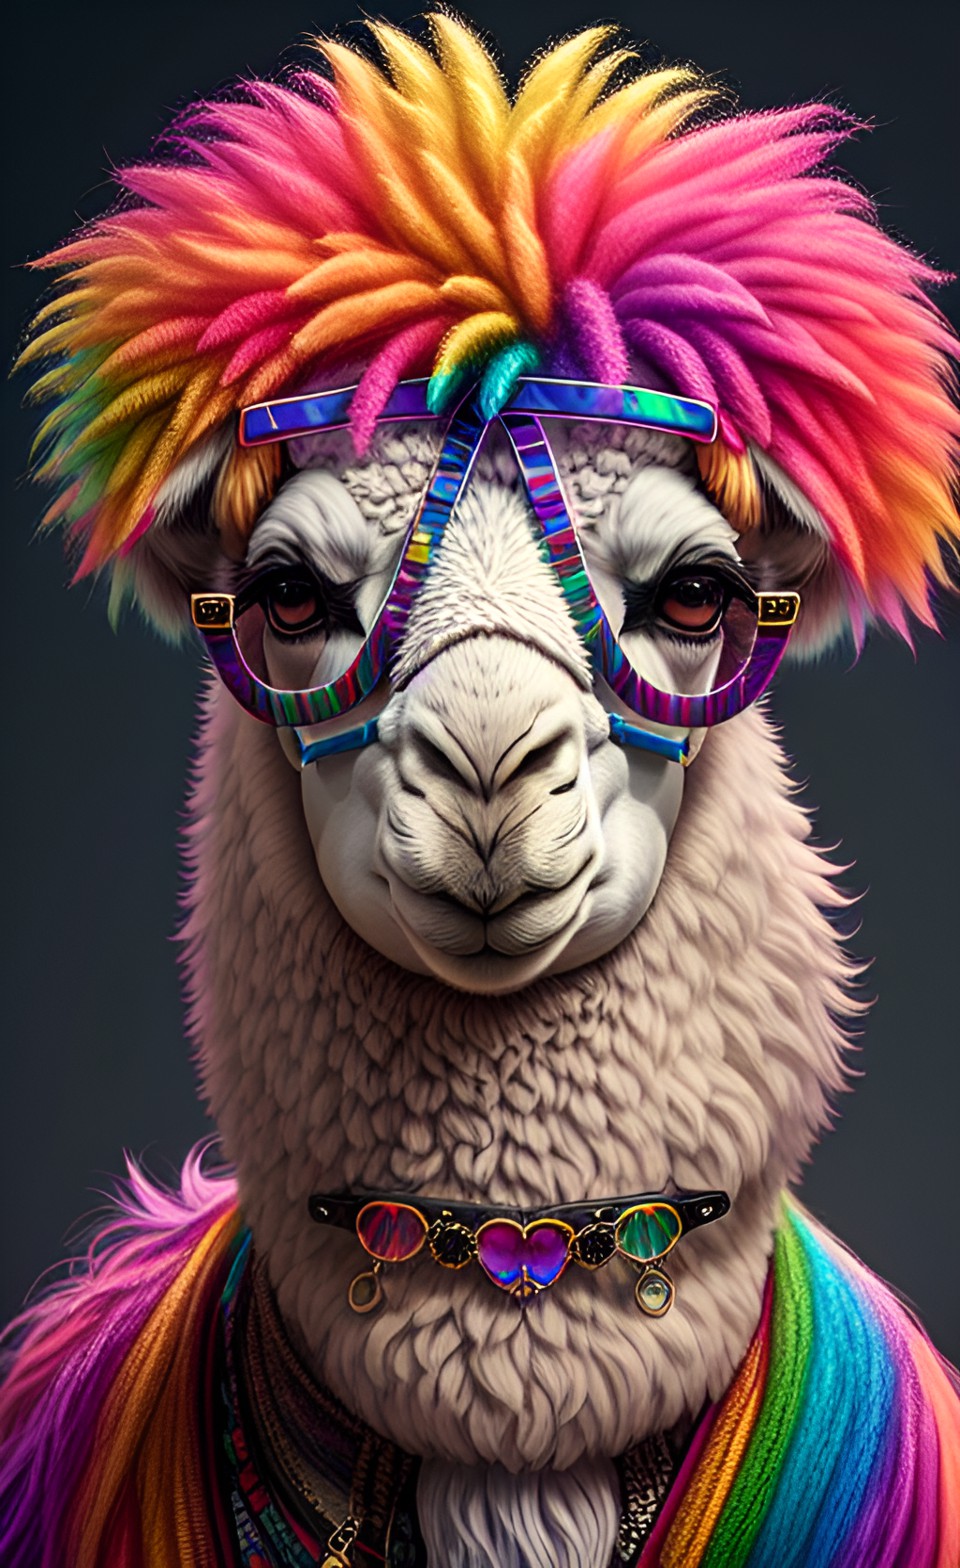 Thanks for the Llama